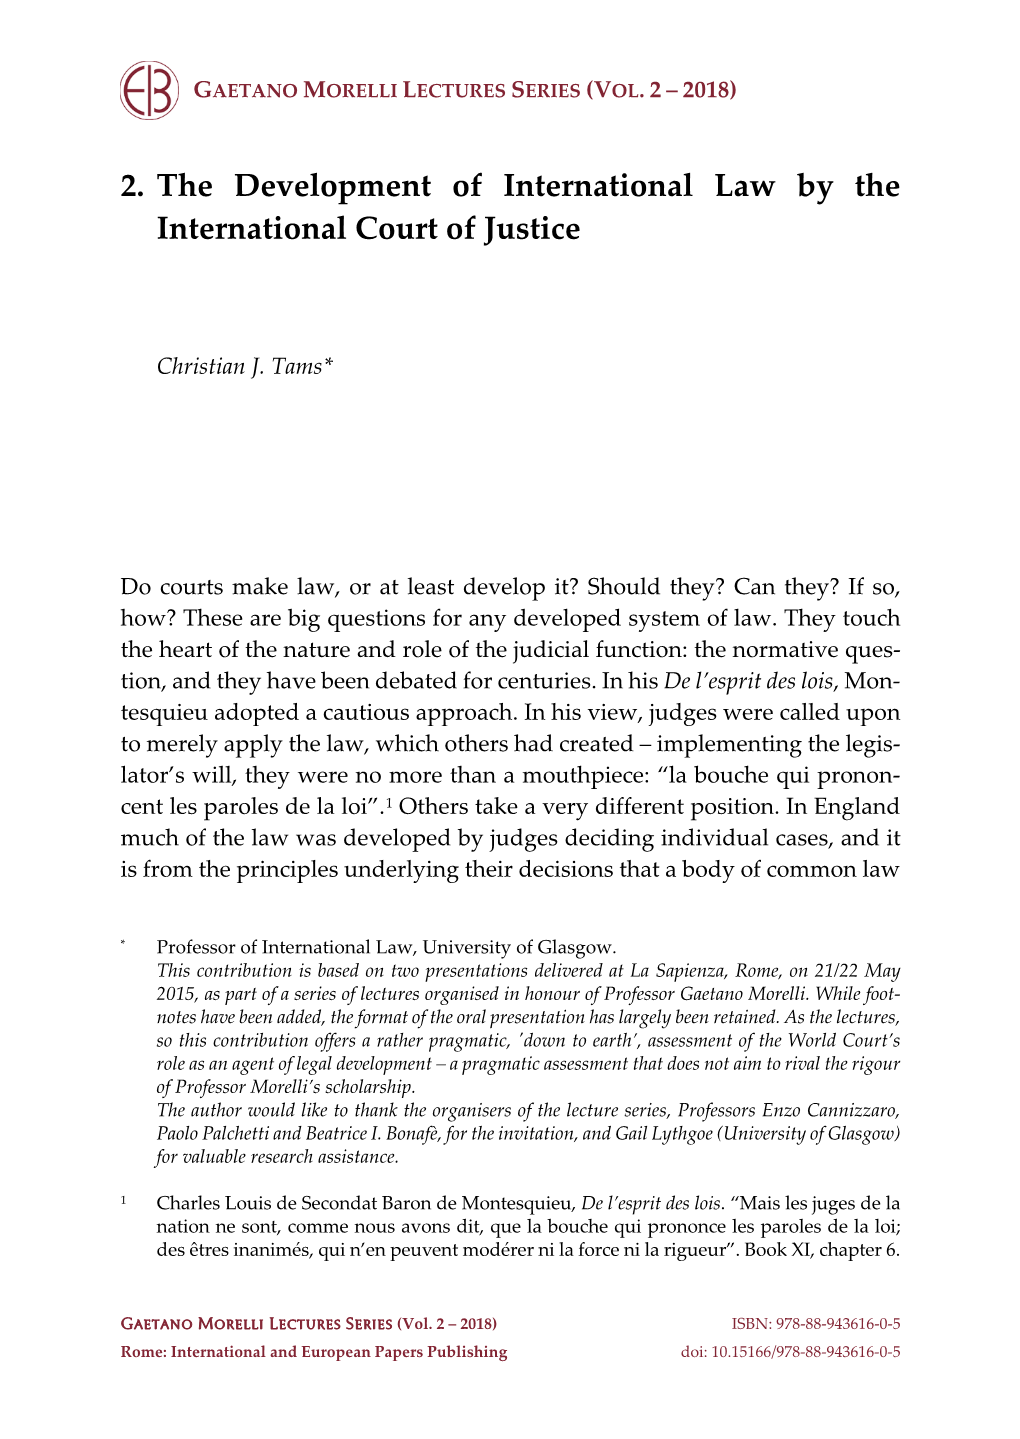 2. the Development of International Law by the International Court of Justice